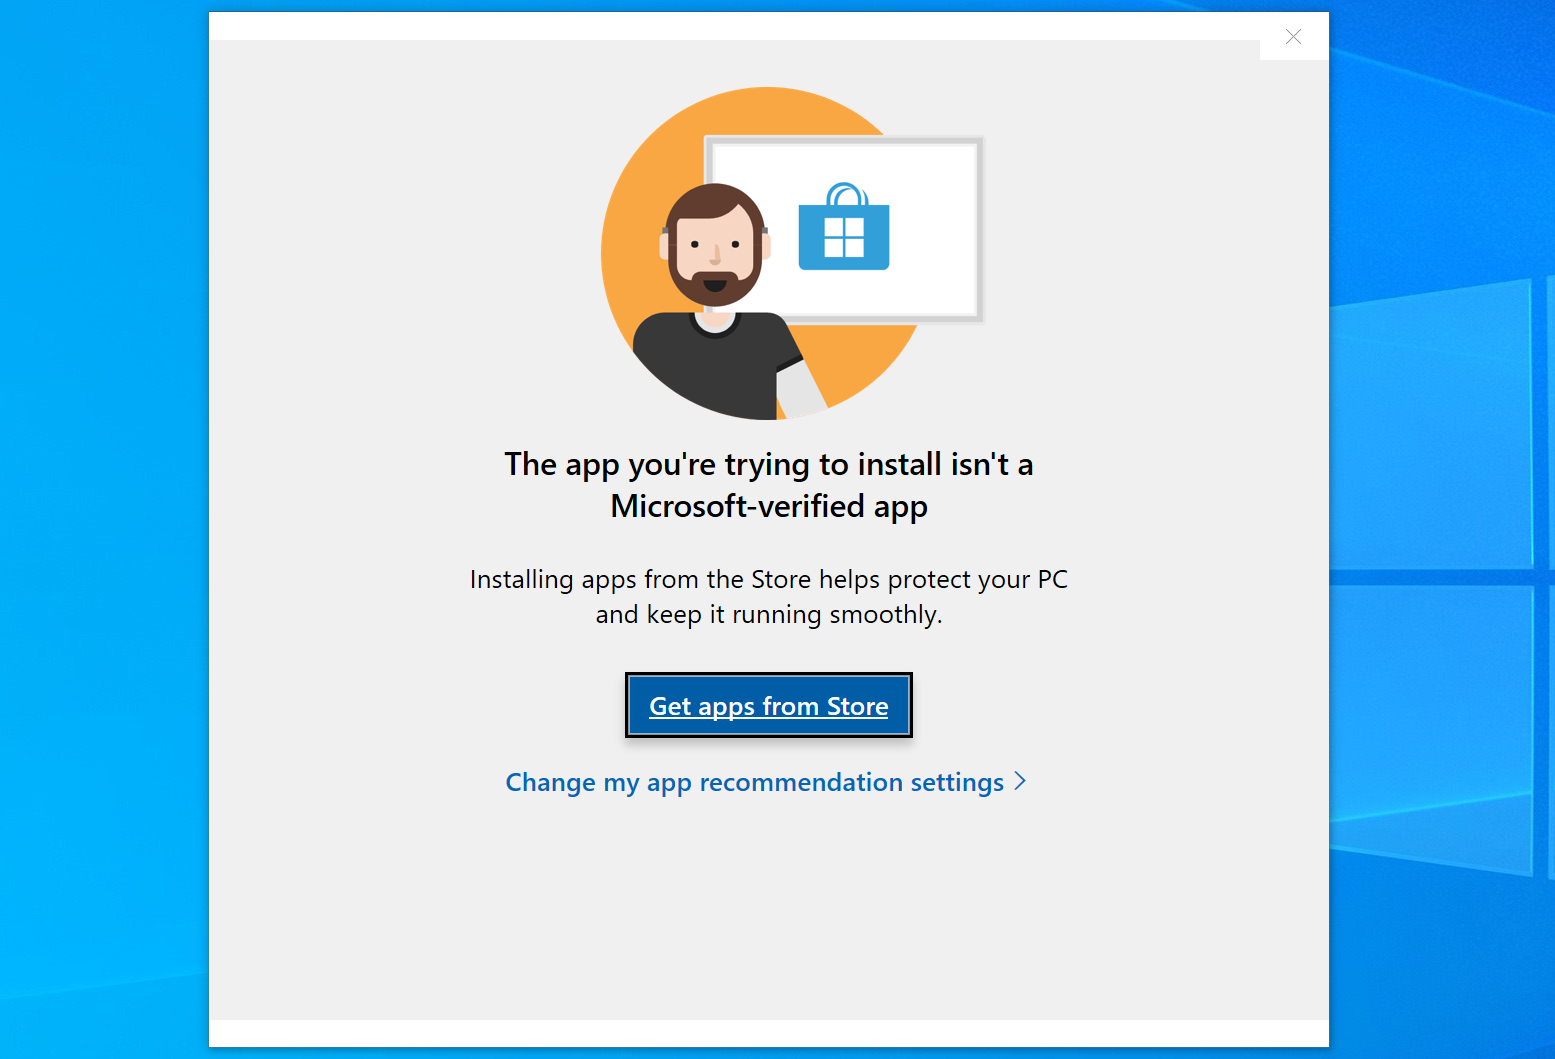 app-trying-to-install-isnt-microsoft-verified